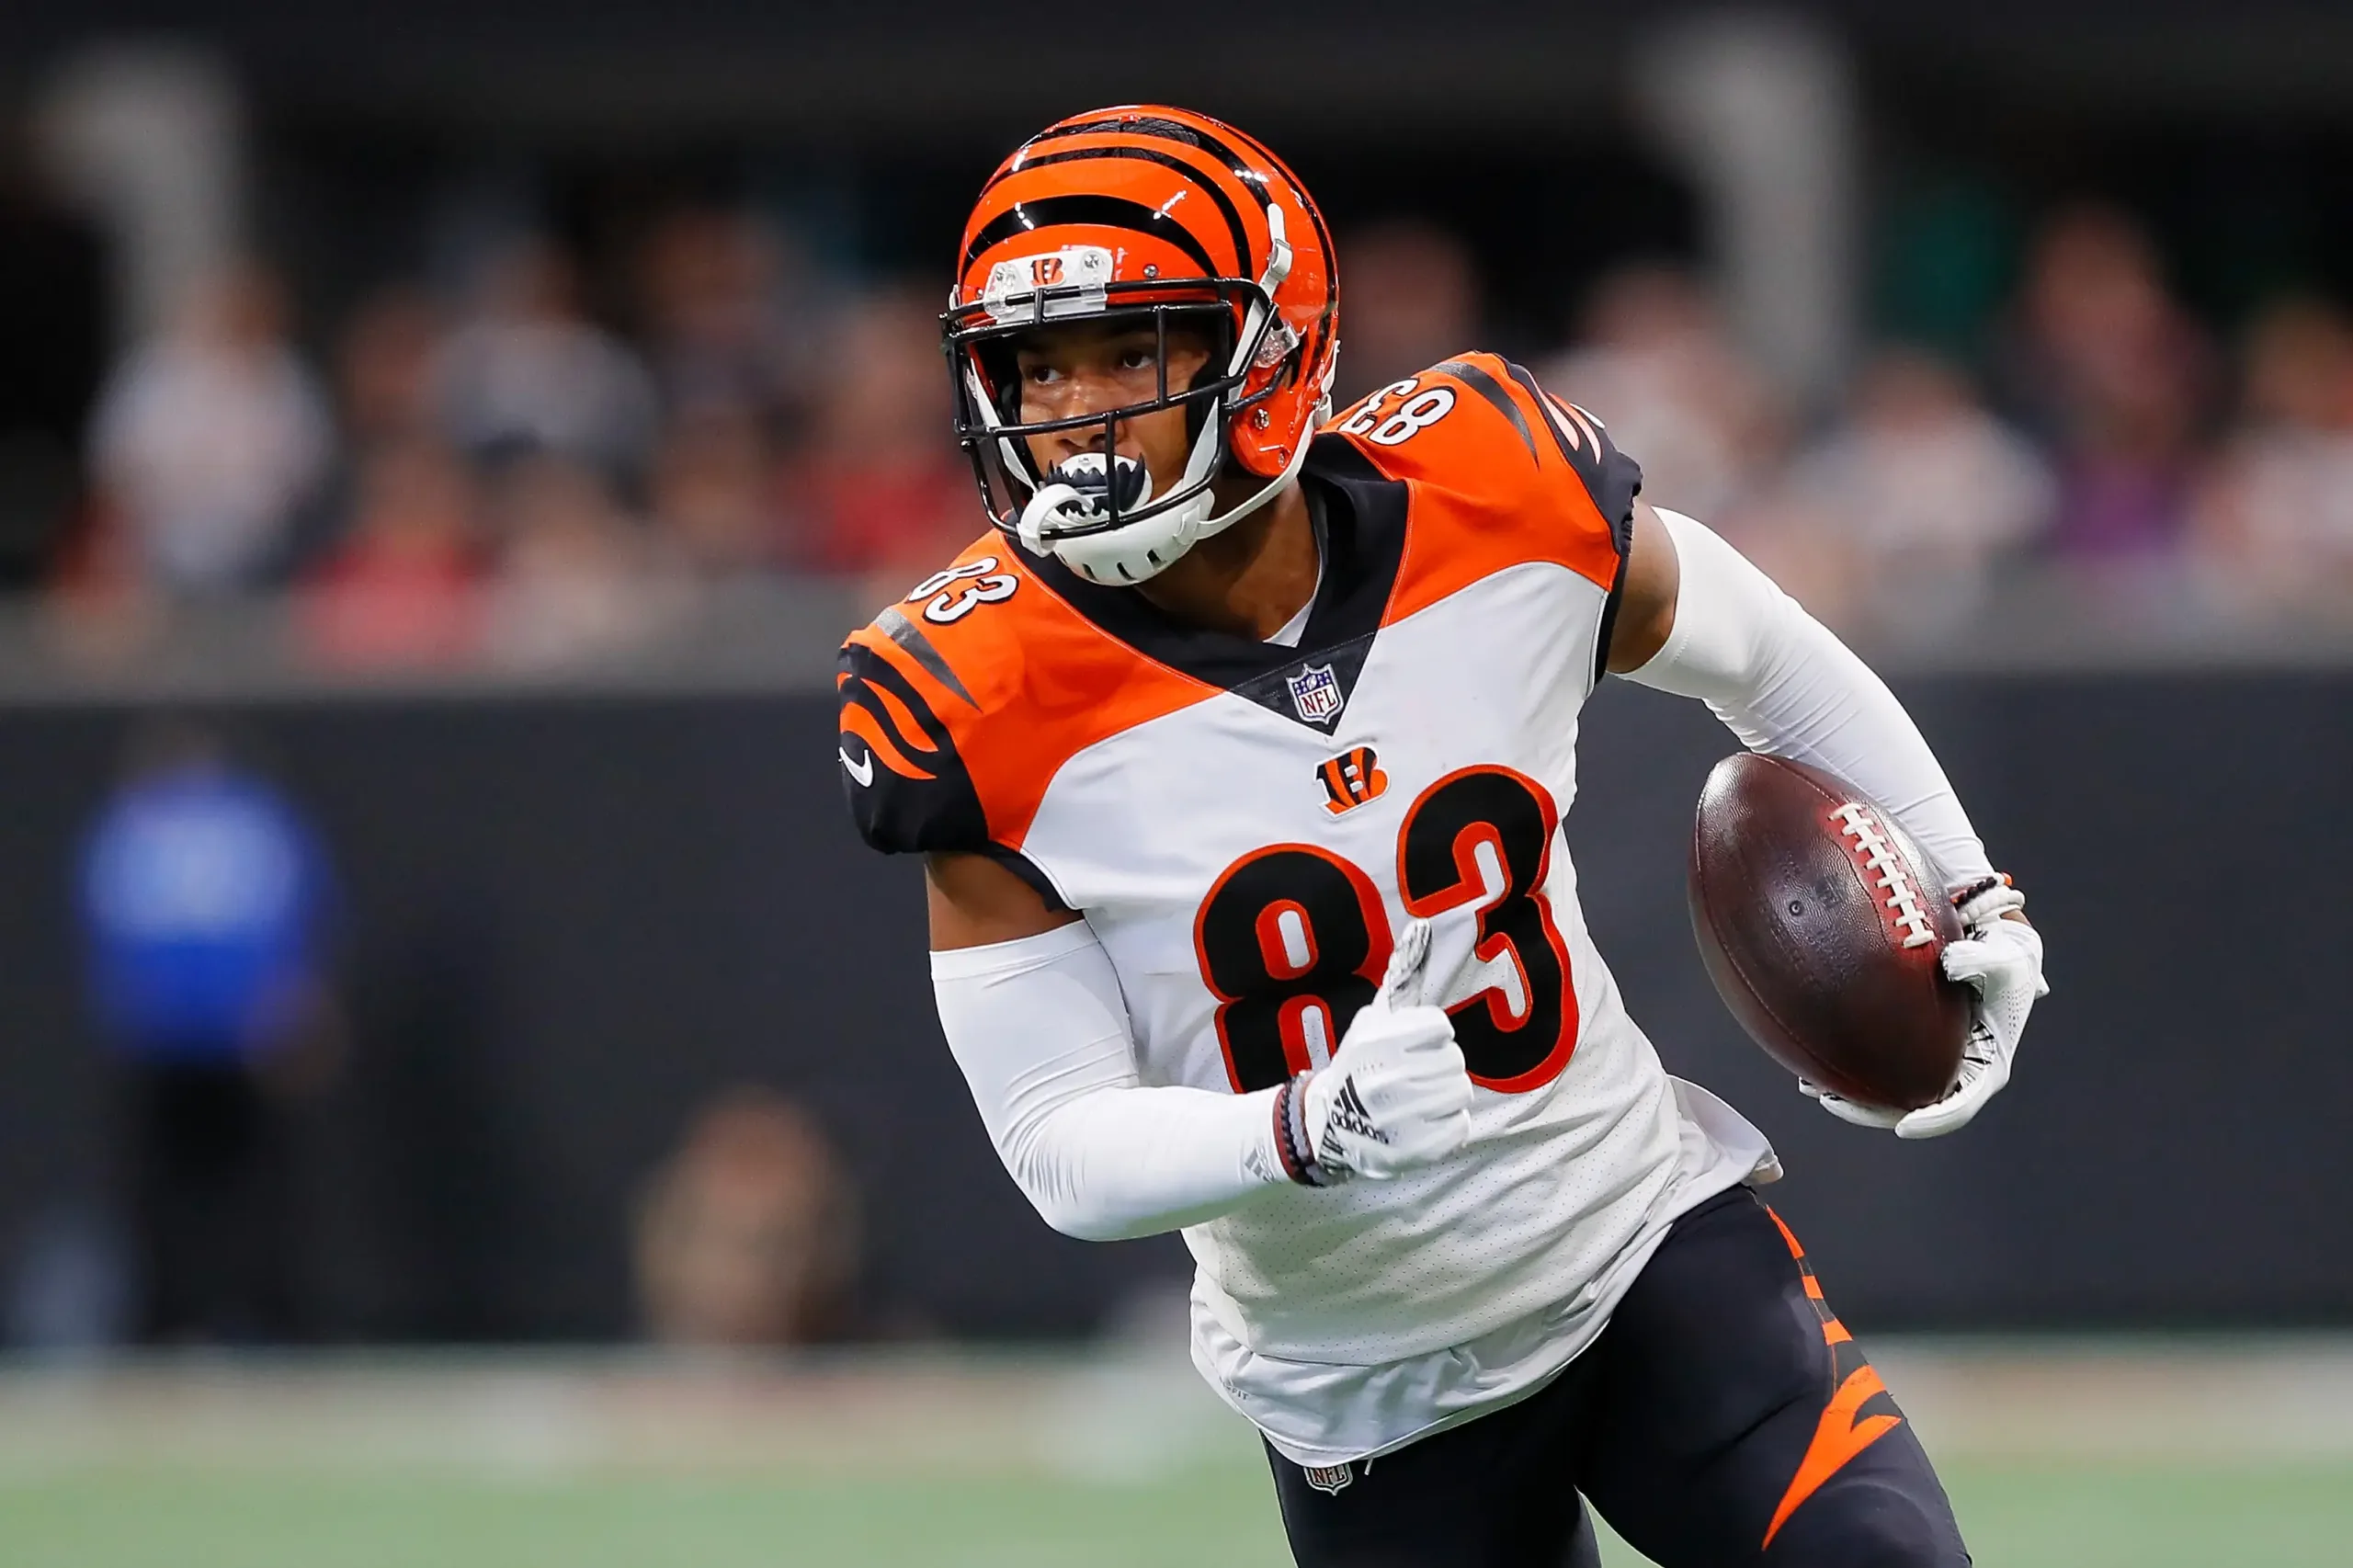 Former Cincinnati receiver Tyler Boyd joins DeAndre Hopkins and Calvin Ridley in Tennessee. (Photo courtesy of HEAVY.COM)